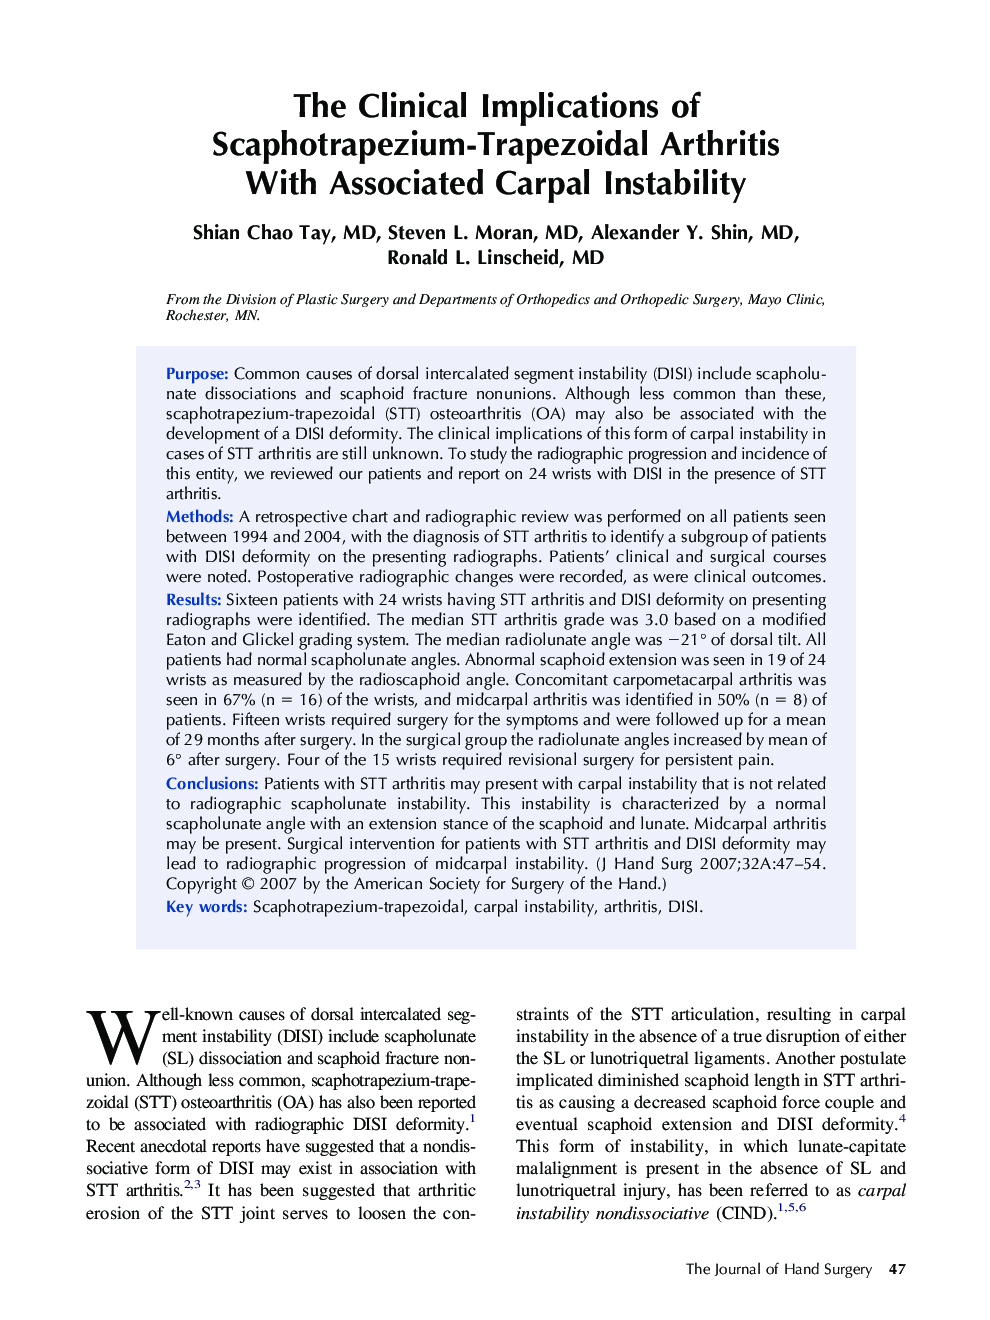 The Clinical Implications of Scaphotrapezium-Trapezoidal Arthritis With Associated Carpal Instability